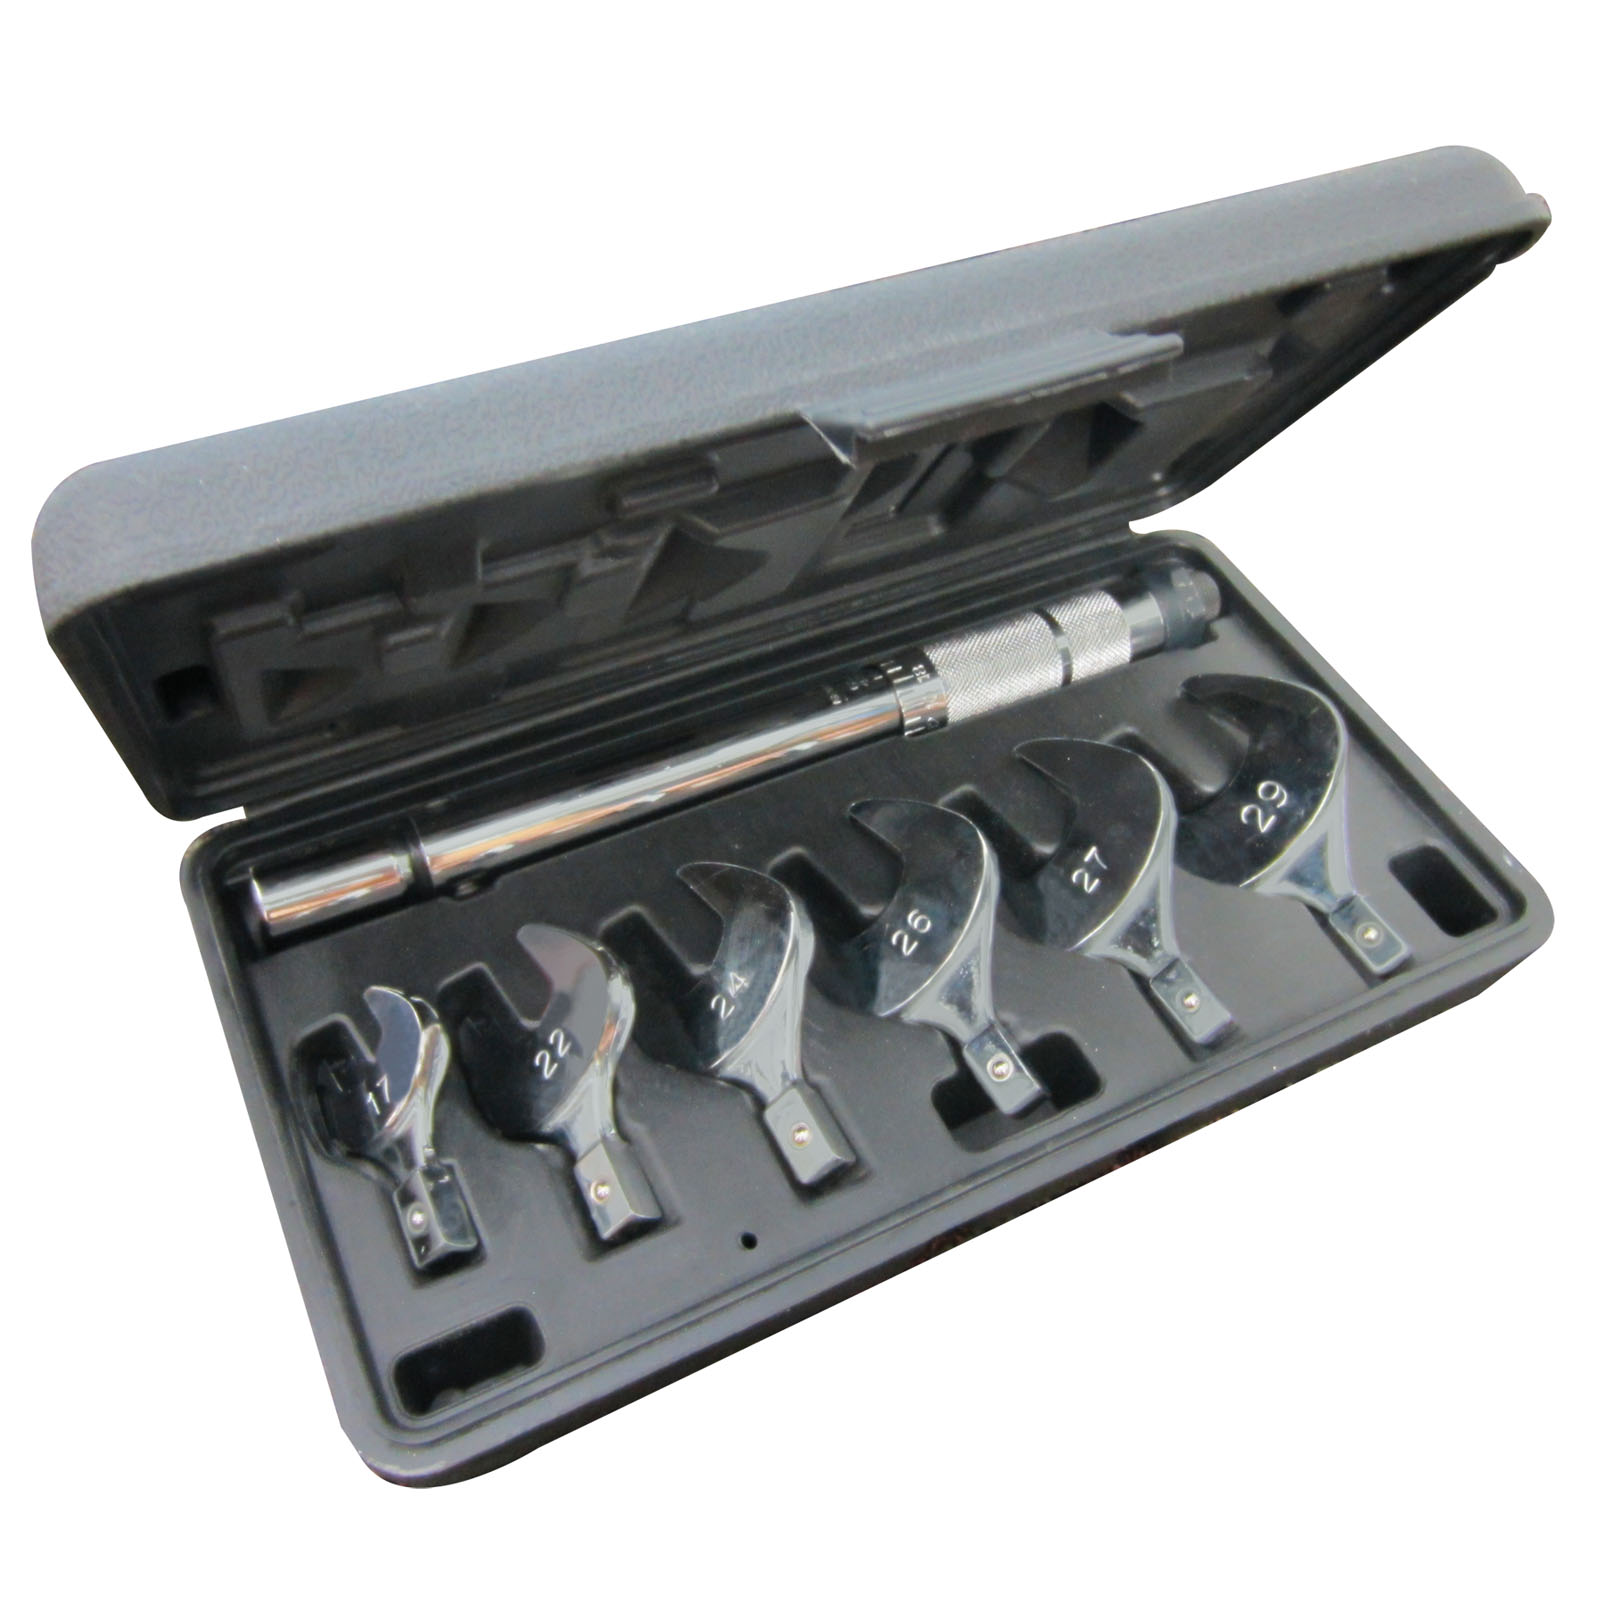 Torque Wrench Kit - 1/4", 3/8", 1/2", 5/8", 3/4" + 7/8"